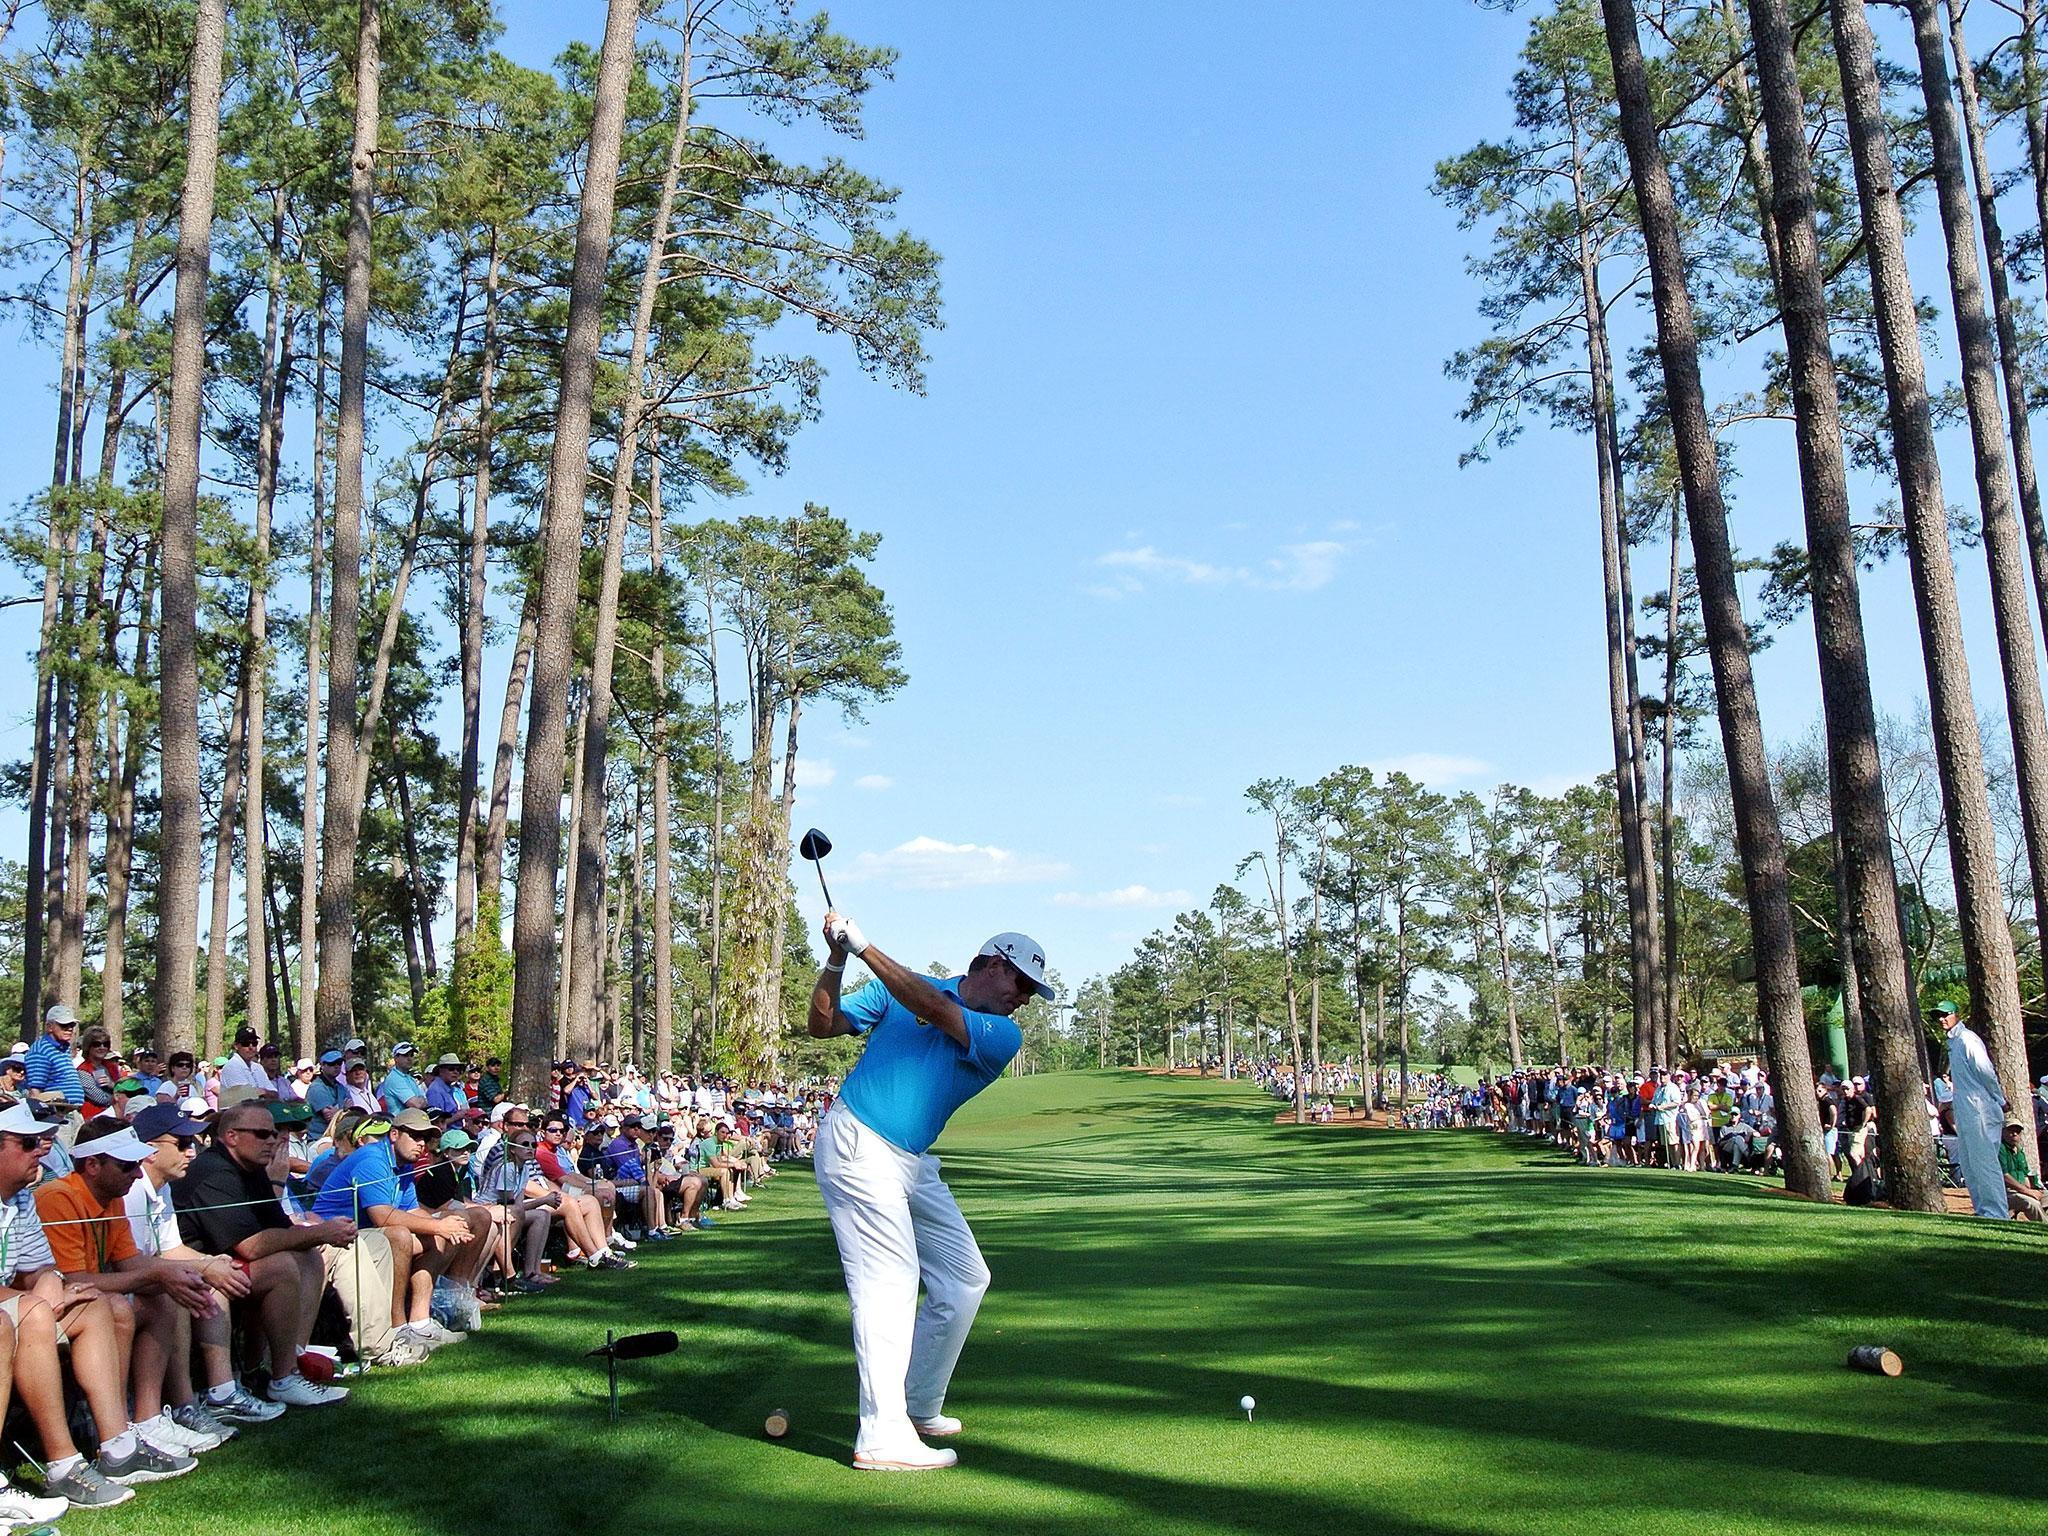 Narrow fairways lined with tall pine trees dominate Augusta severely punishing off line shots